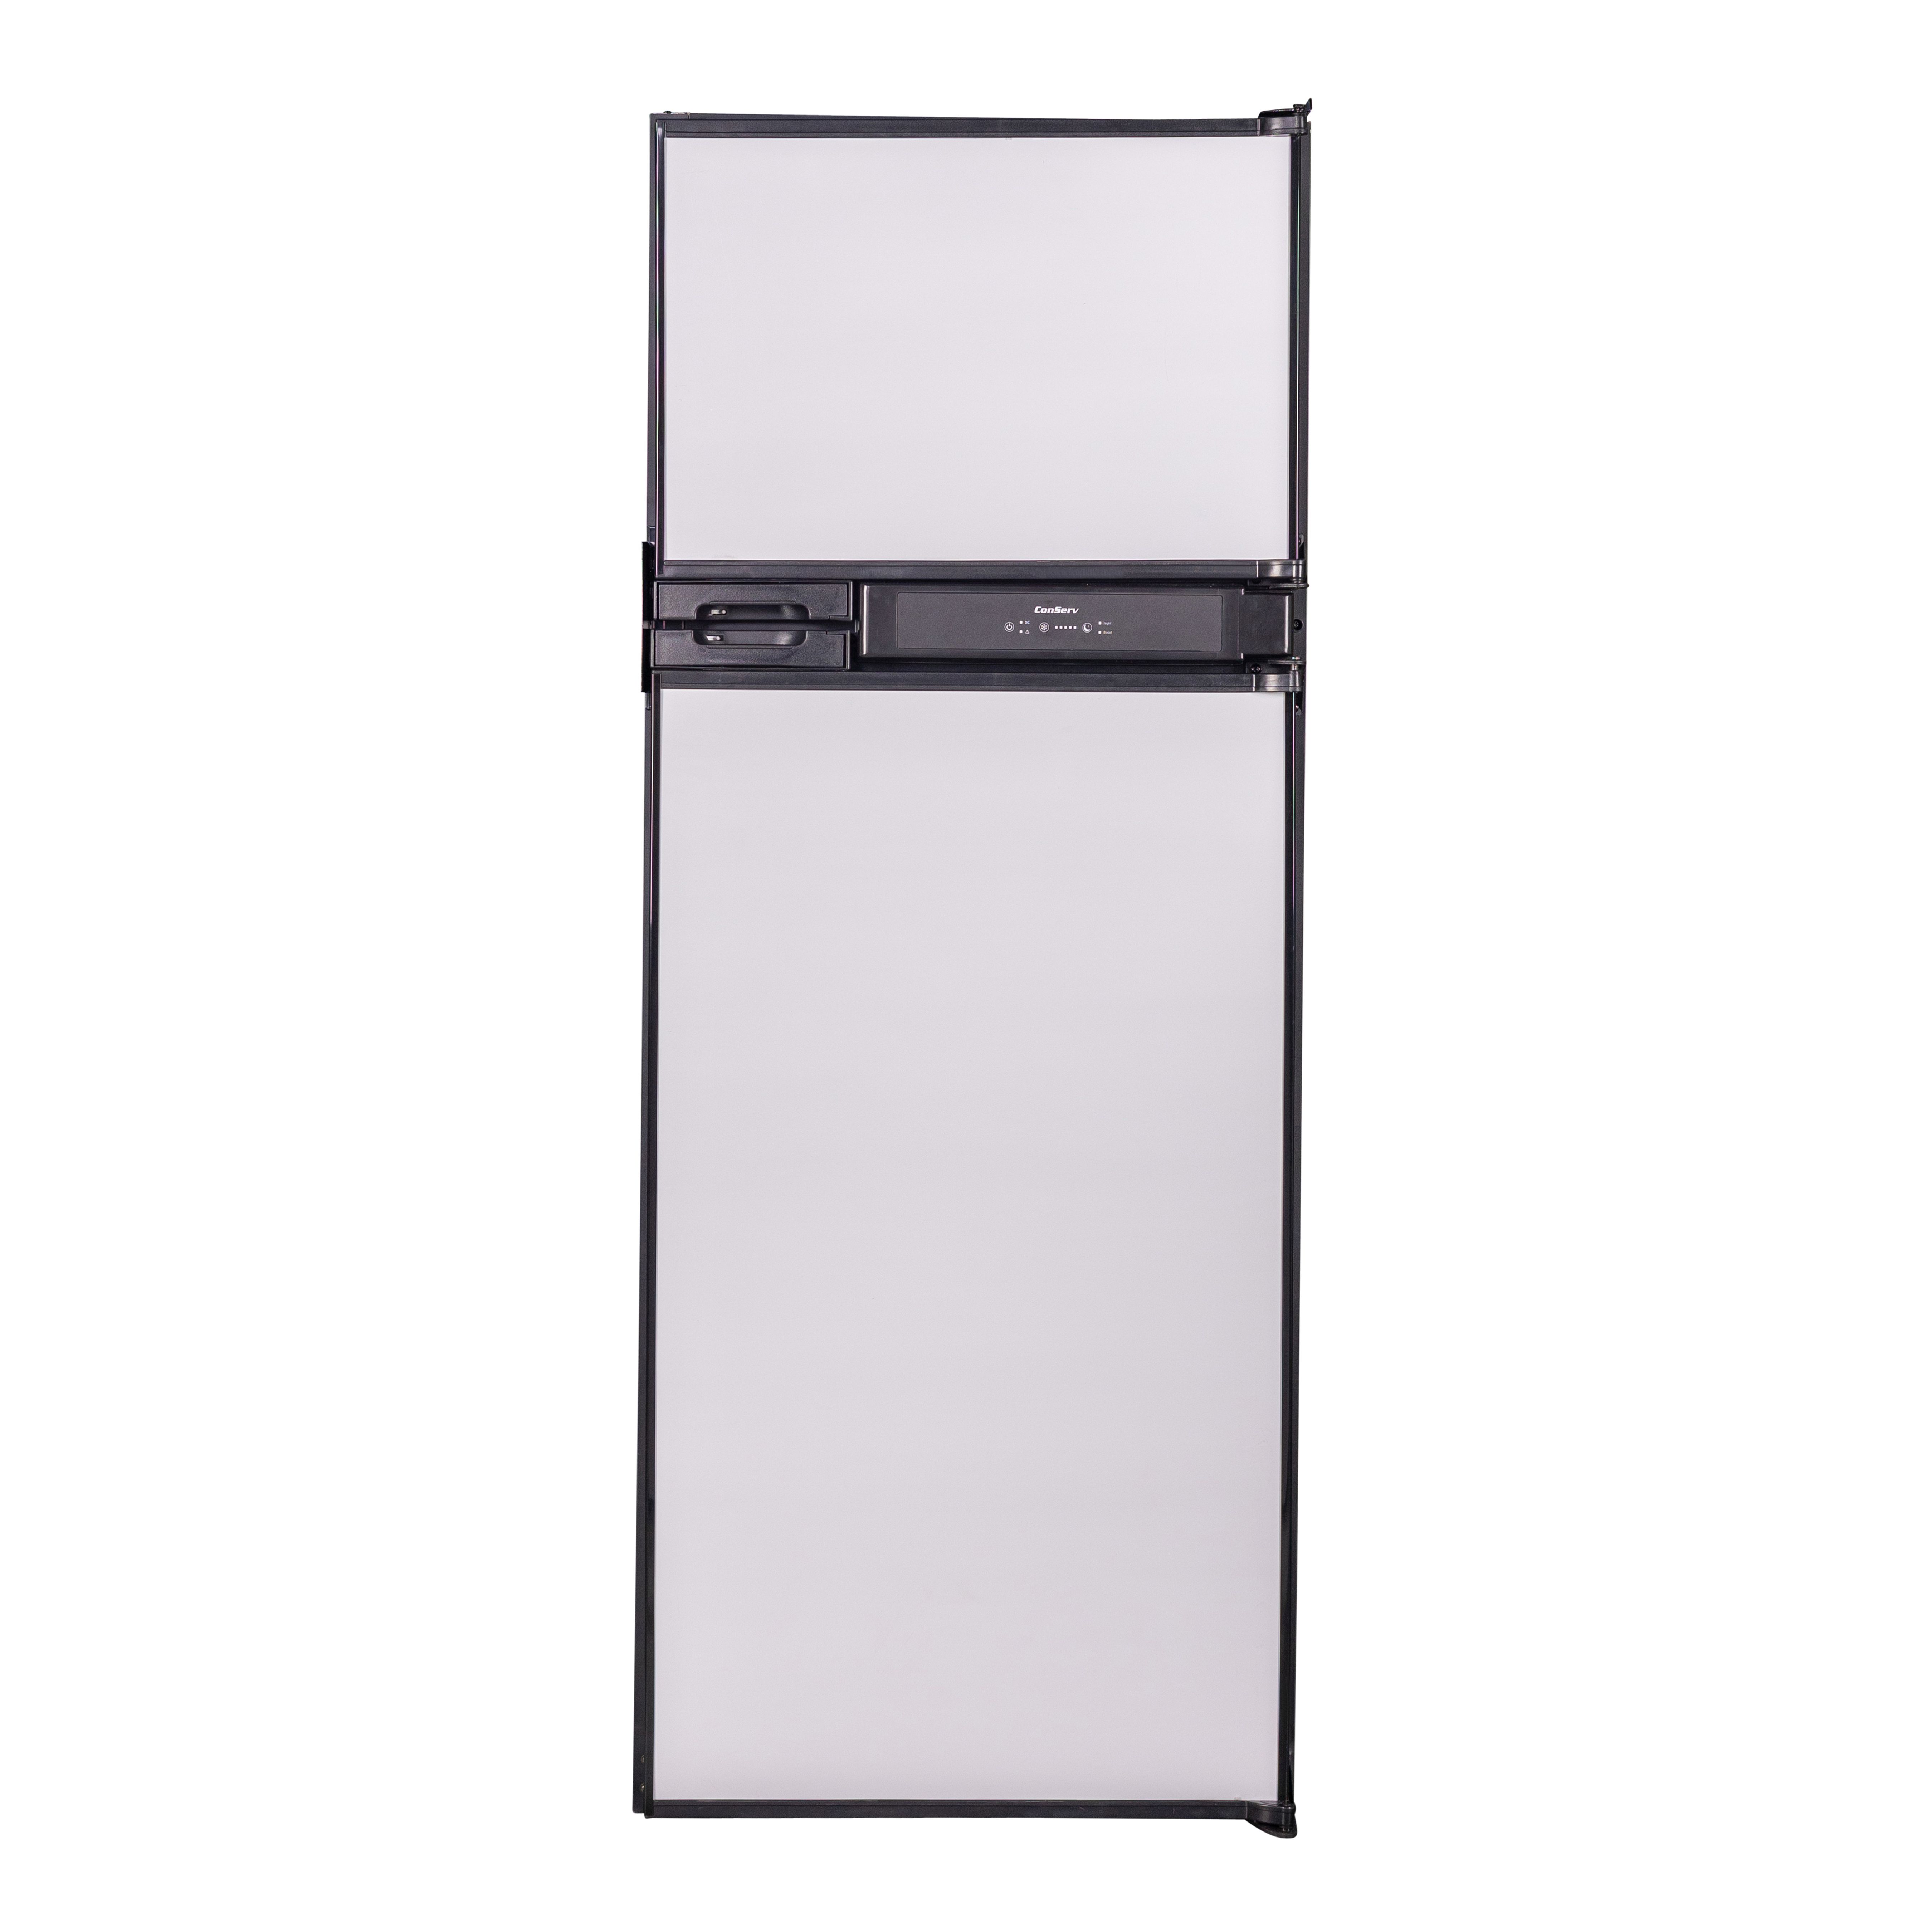 Picture of Equator Advanced Appliances RF 1012 DC S Conserv RV Refrigerator 10 cf/12V/Stainless